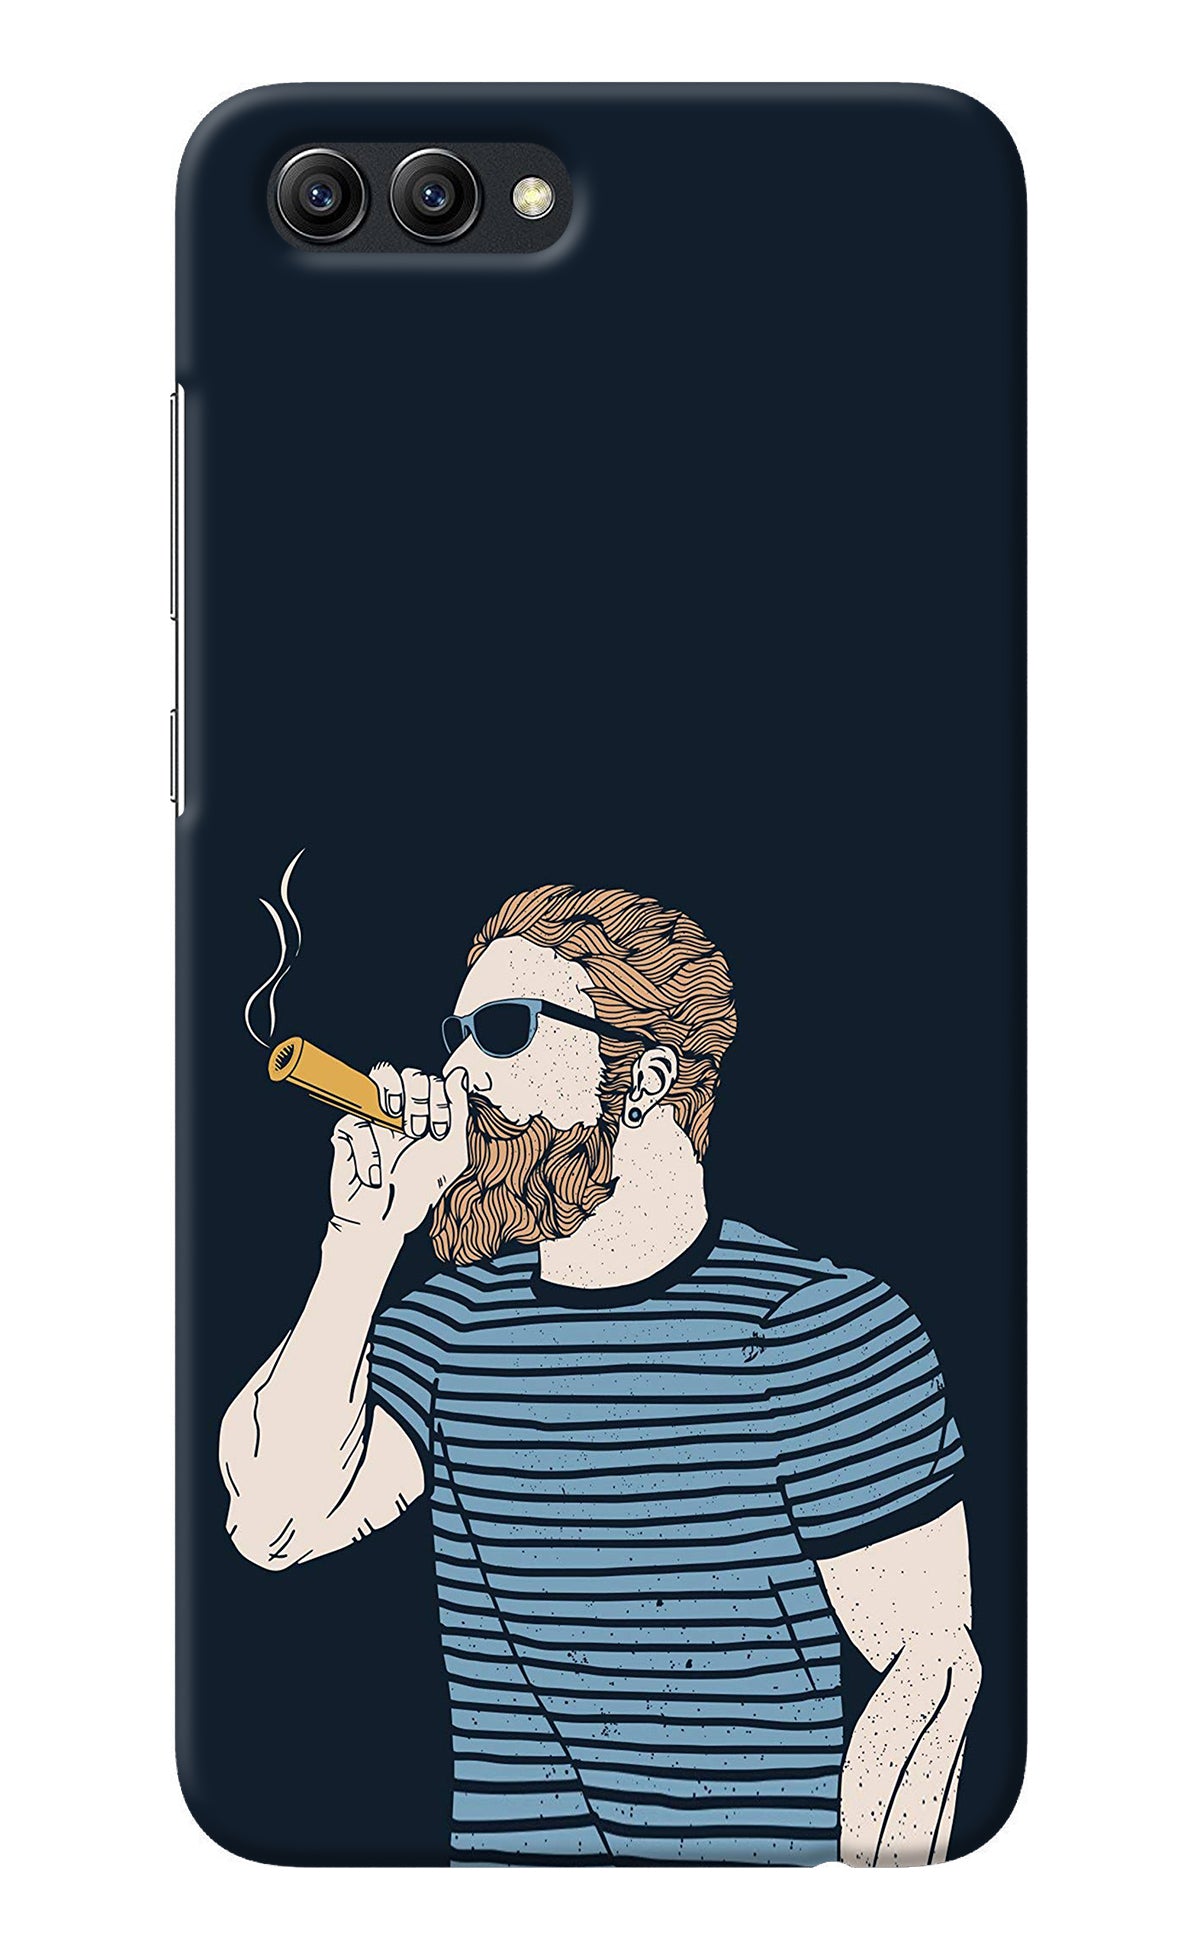 Smoking Honor View 10 Back Cover